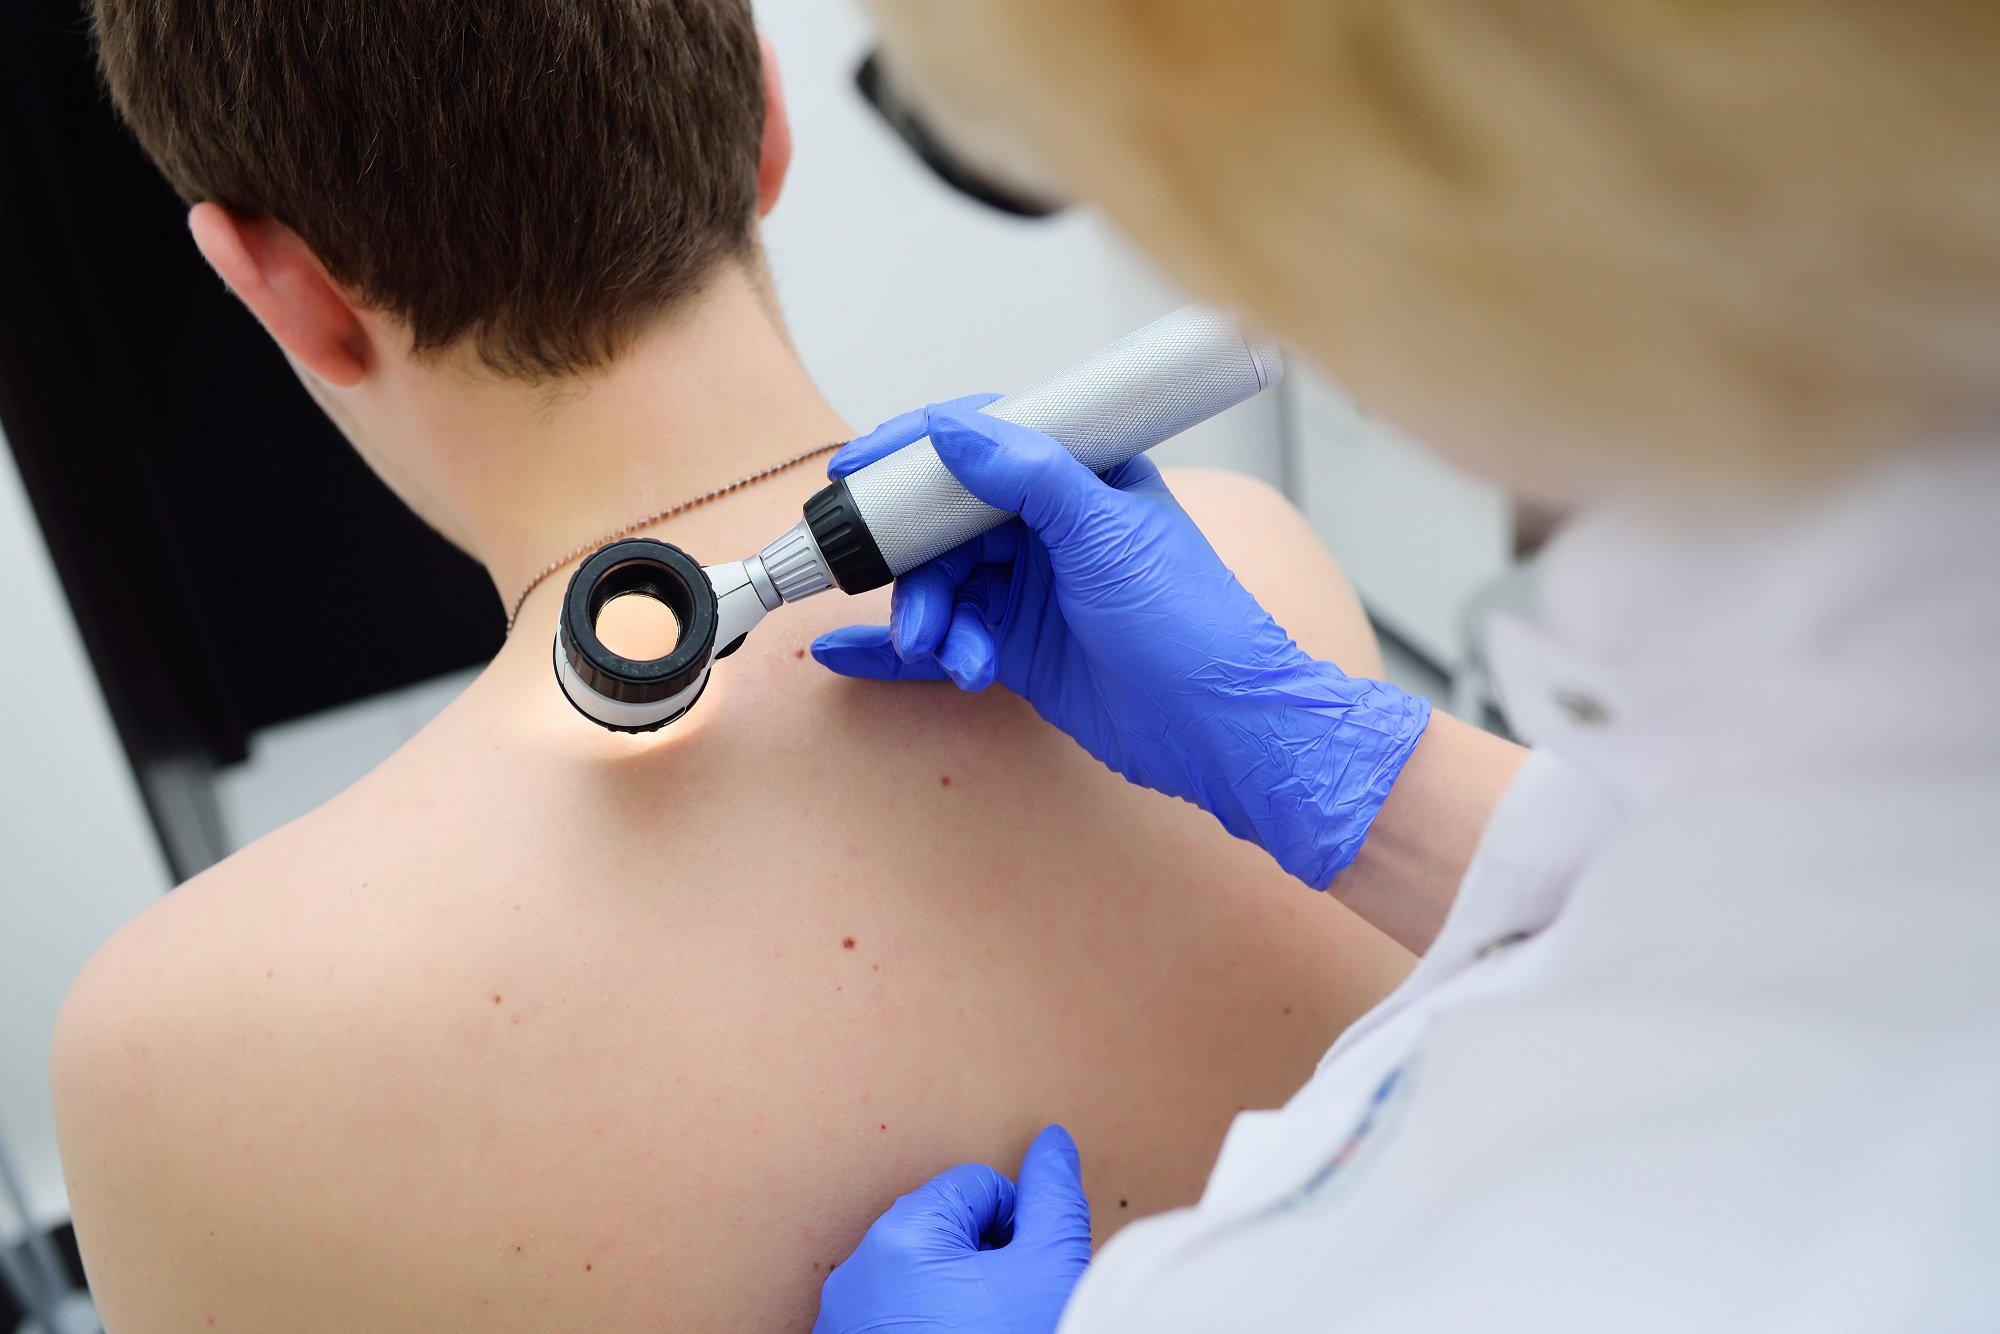 A healthcare provider is using a dermatoscope to perform a skin check on a patient’s back